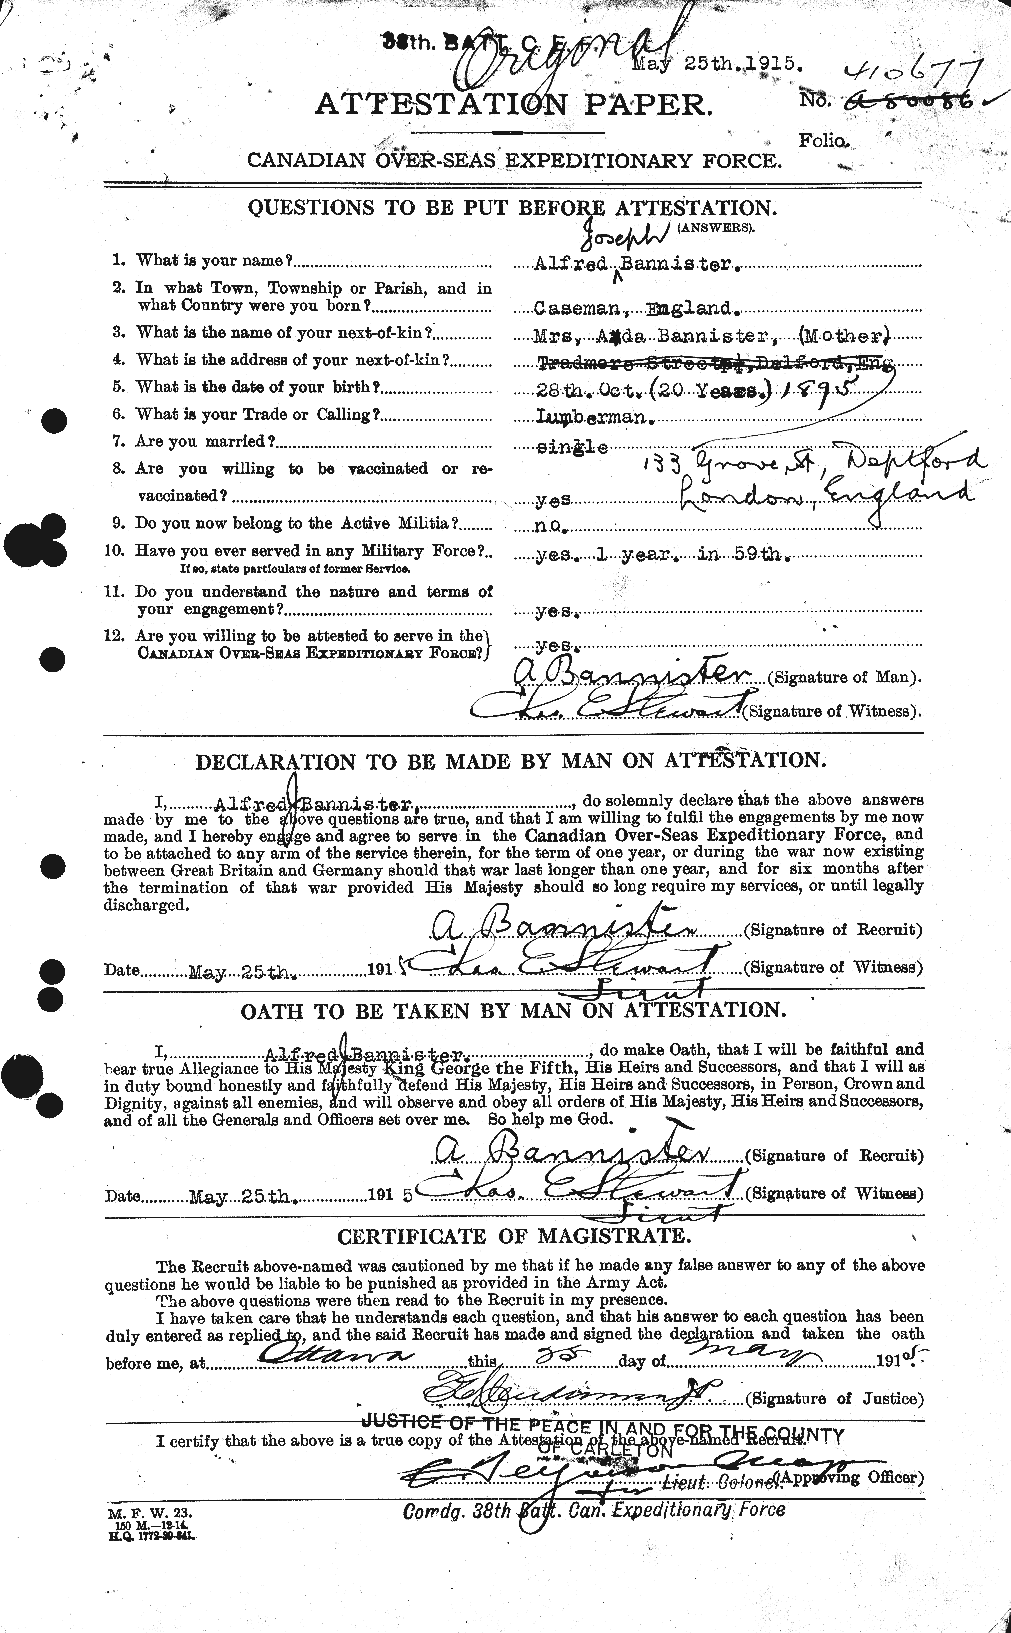 Personnel Records of the First World War - CEF 224813a